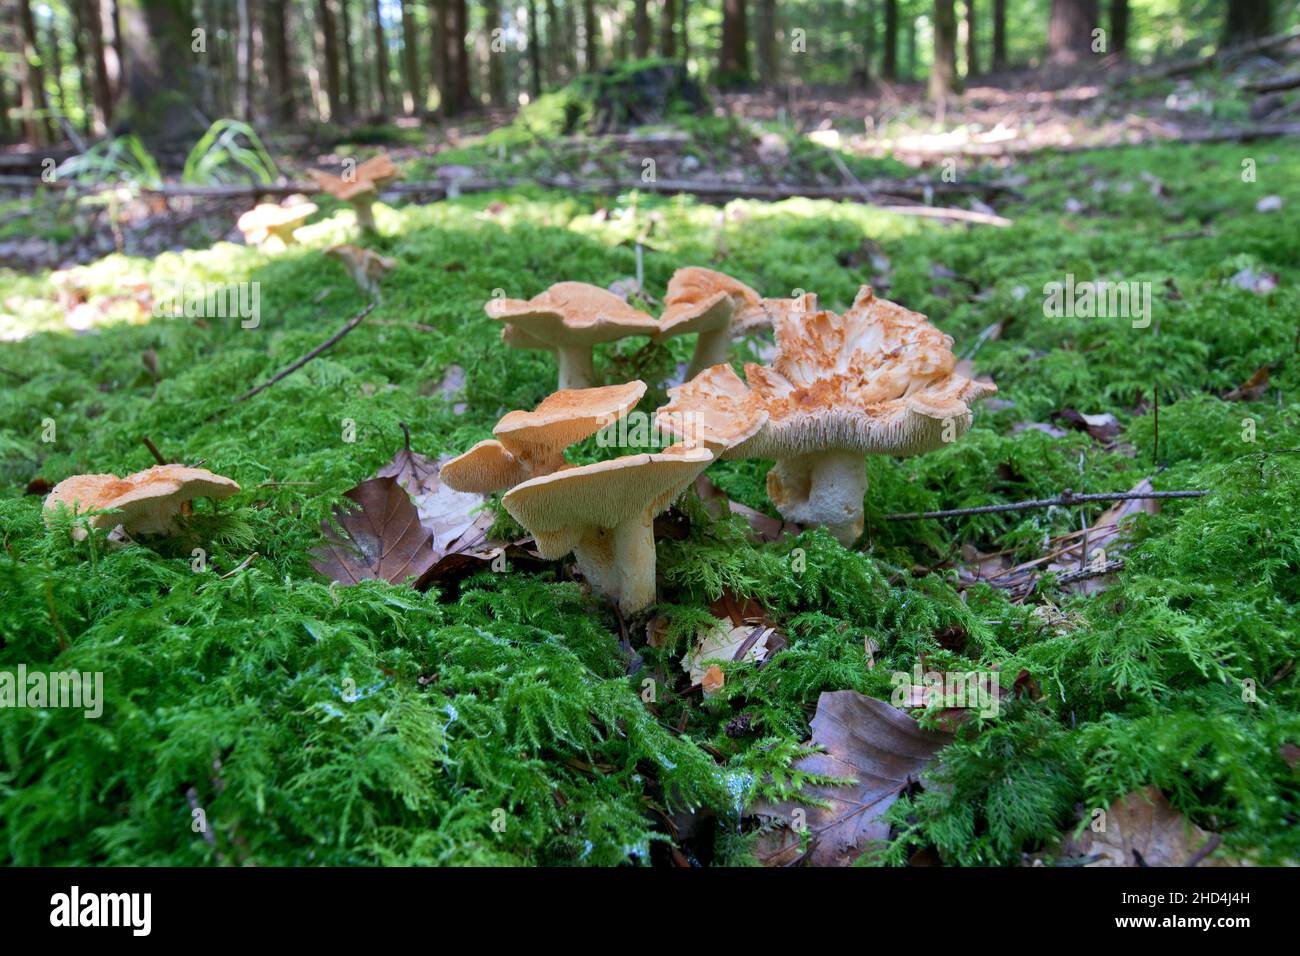 Hydnum repandum, commonly known as the sweet tooth, wood hedgehog or hedgehog mushroom, is a basidiomycete fungus of the family Hydnaceae. Stock Photo